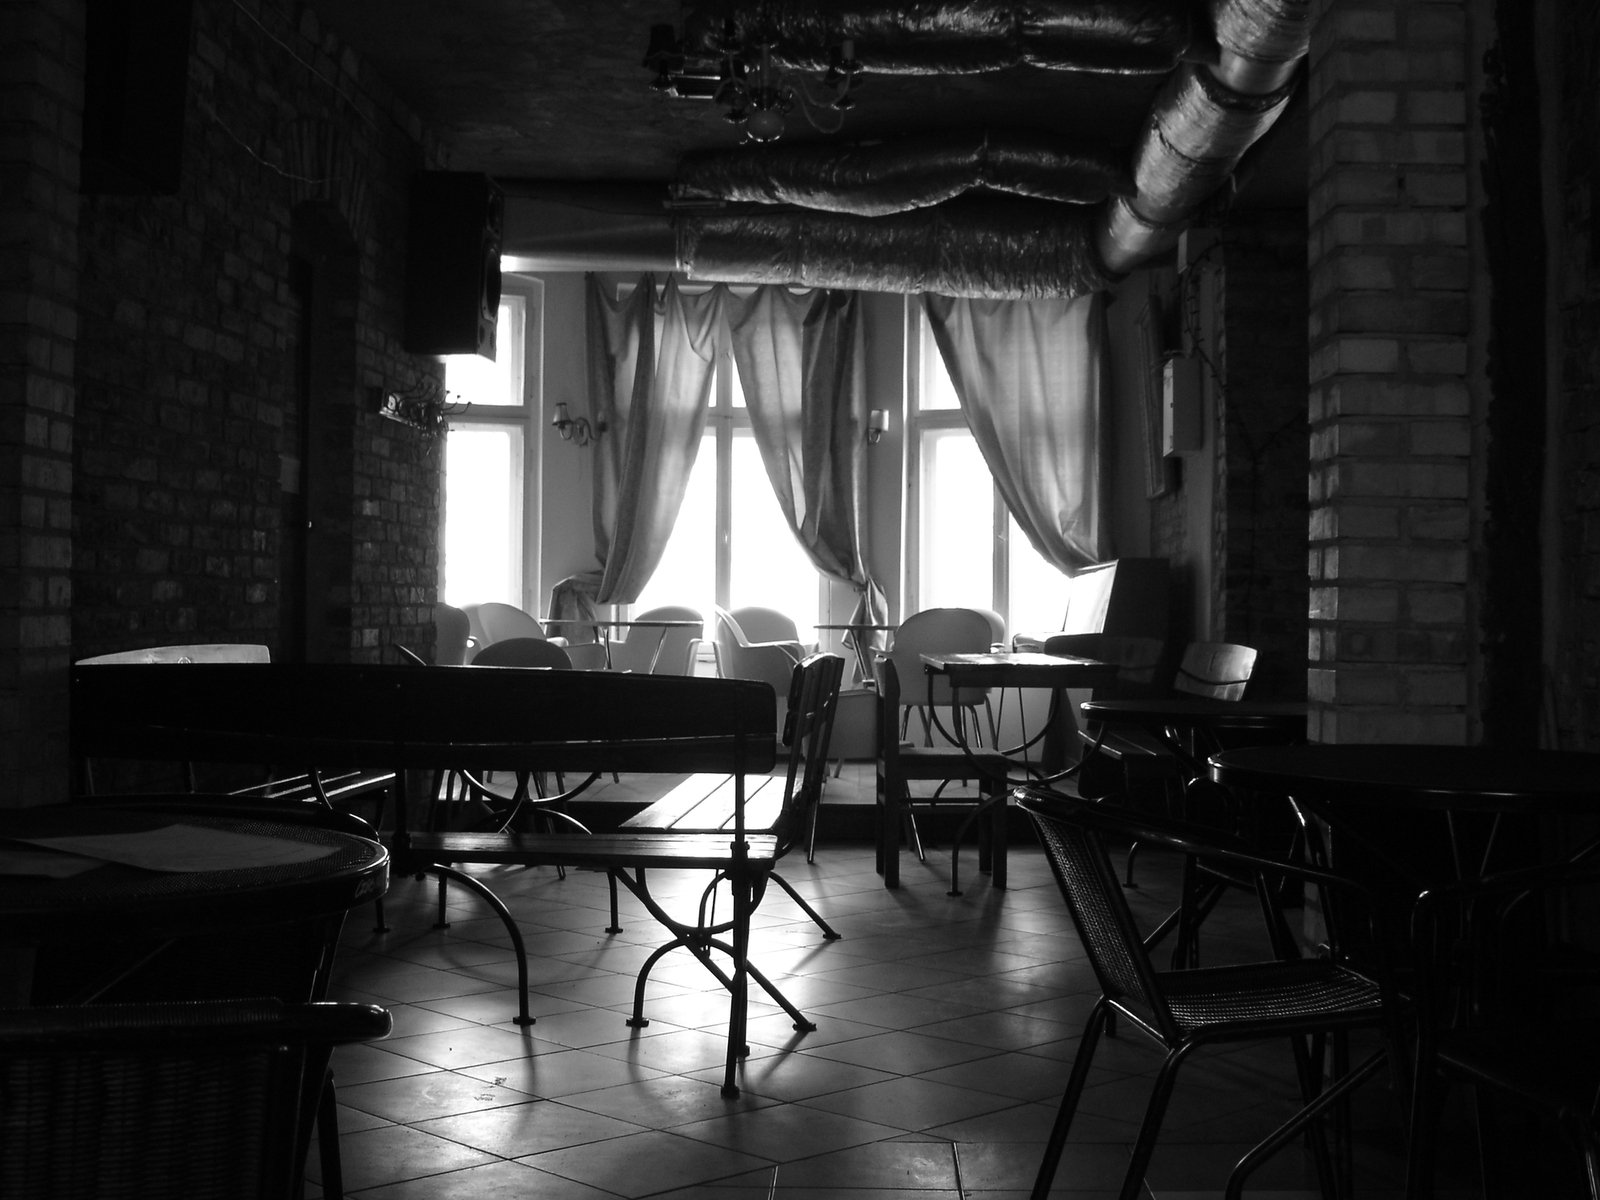 dining area with several tables and chairs in black and white